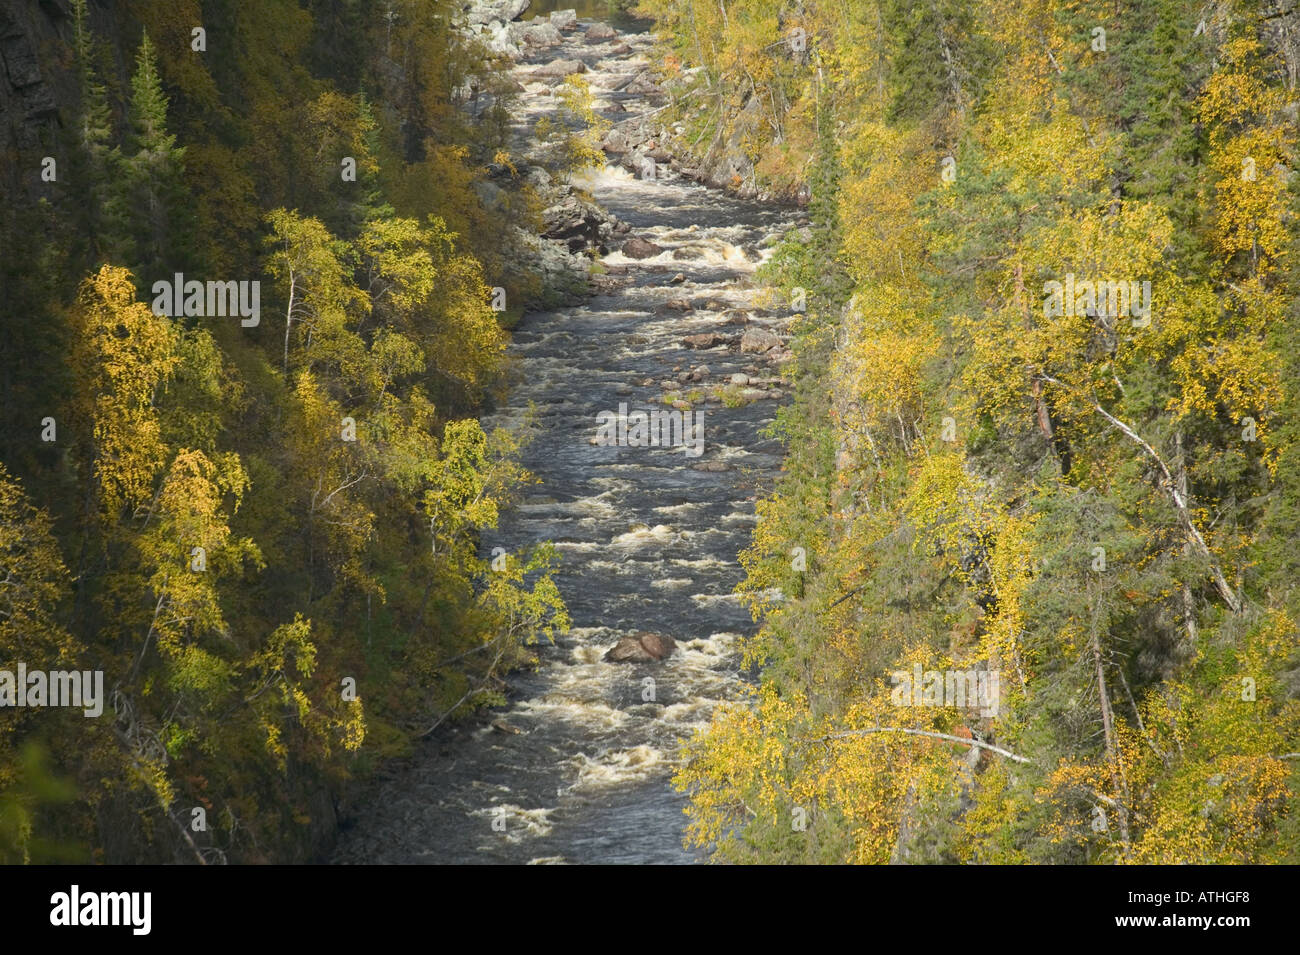 A river flowing through autumnal forest; Muddus National Park, Sweden. Stock Photo